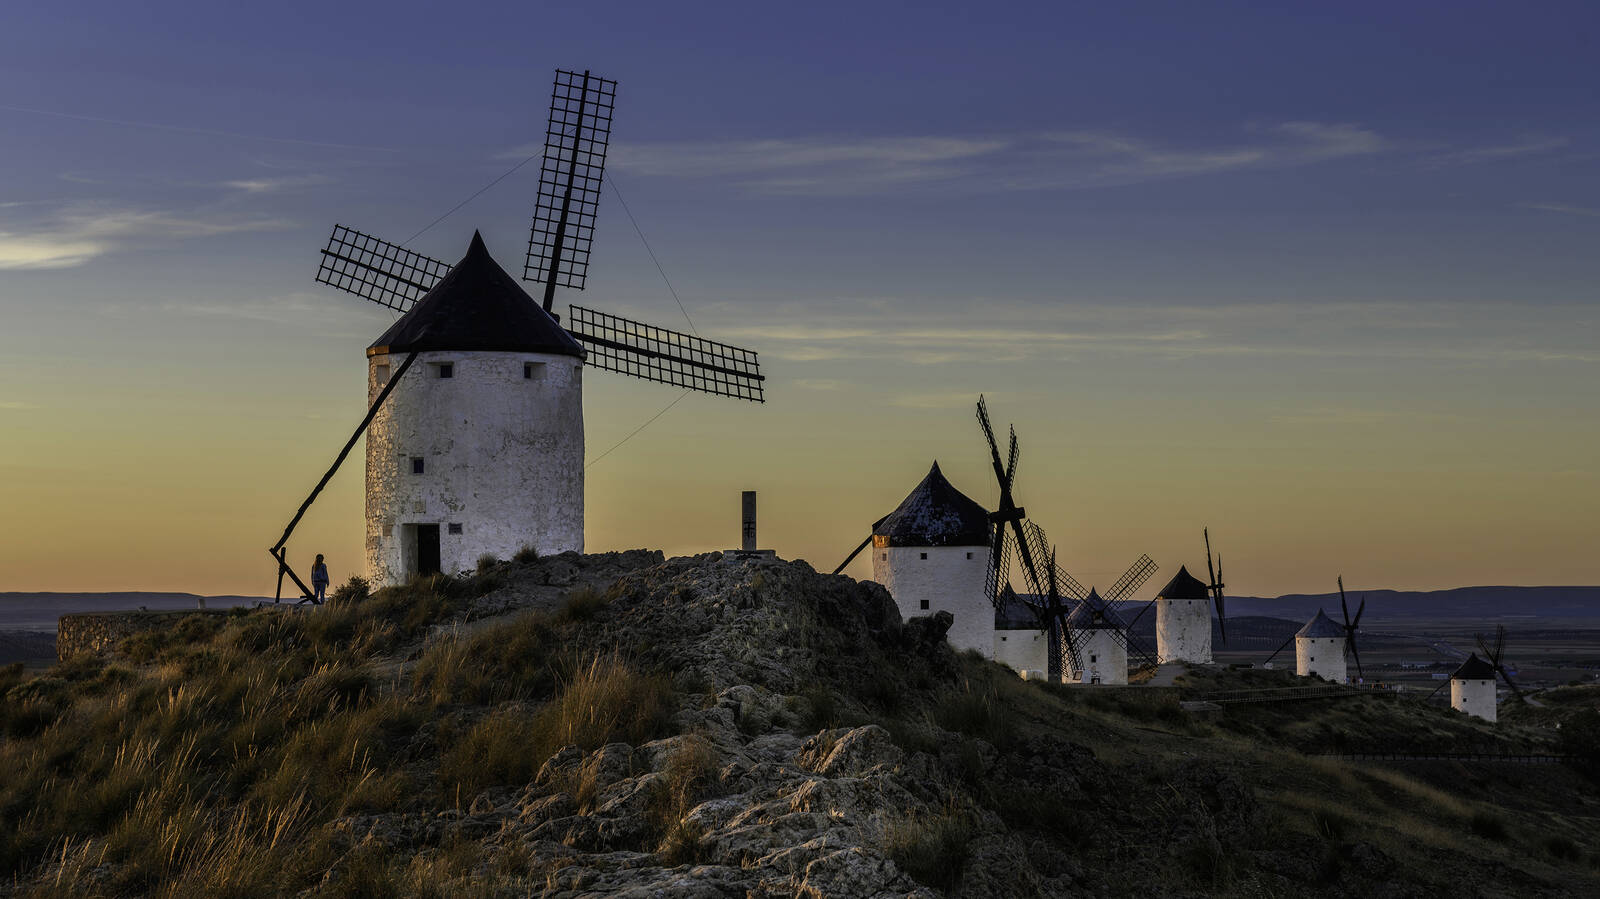 Image of  The Windmills of Consuegra by Flemming Nielsen